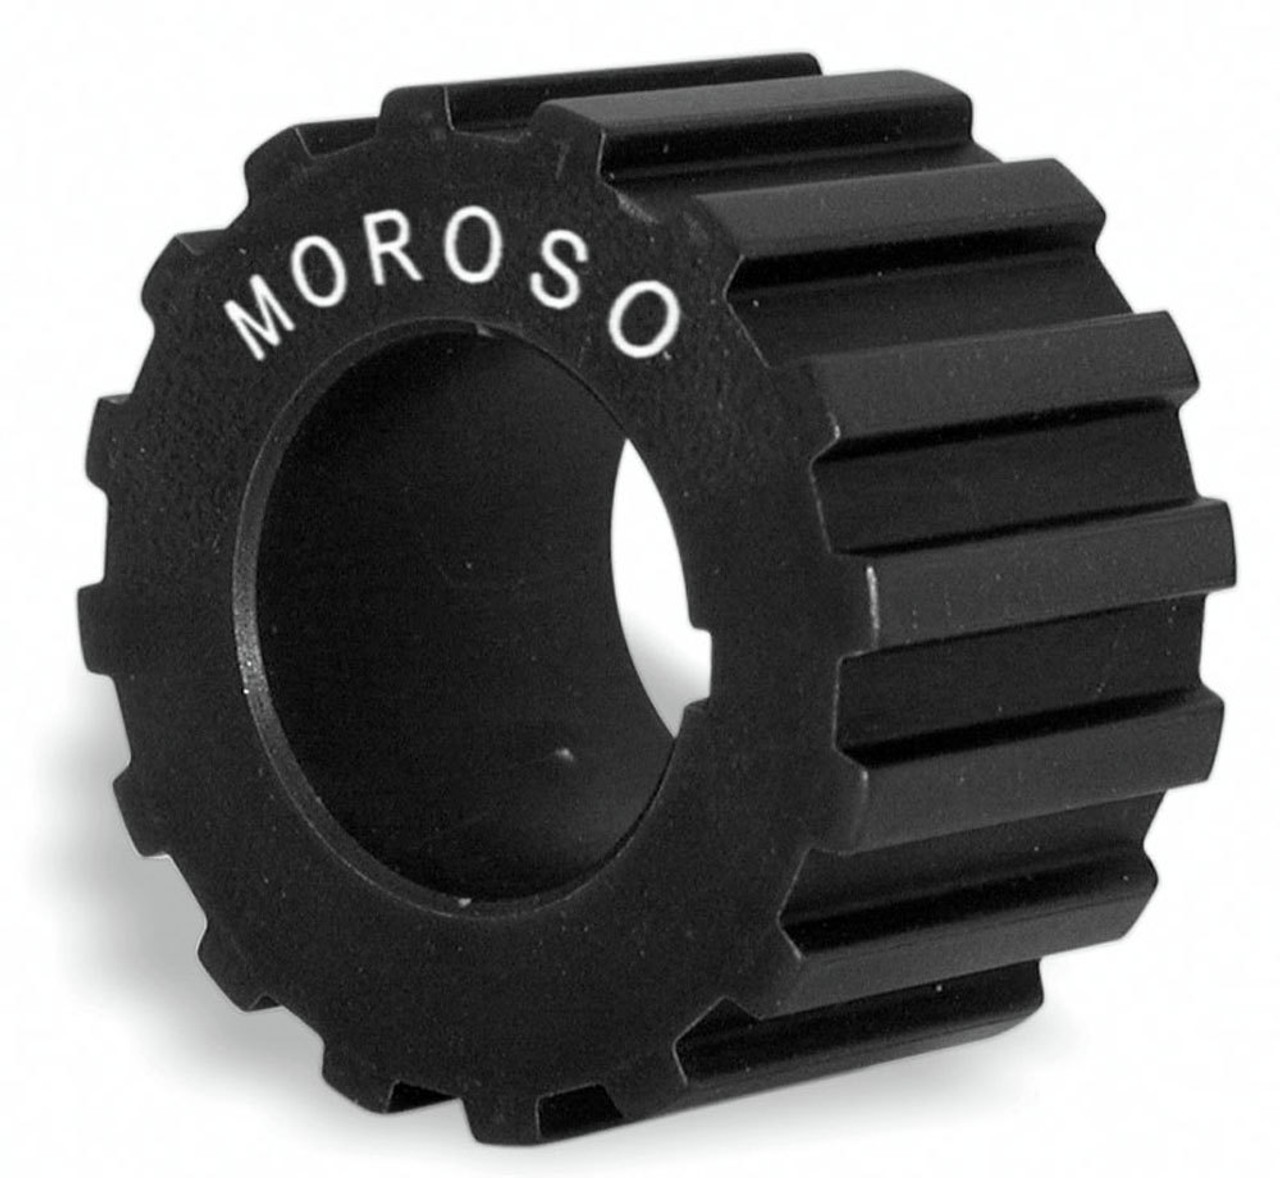 Moroso 16 Tooth Gilmer Drive Crank Pulley